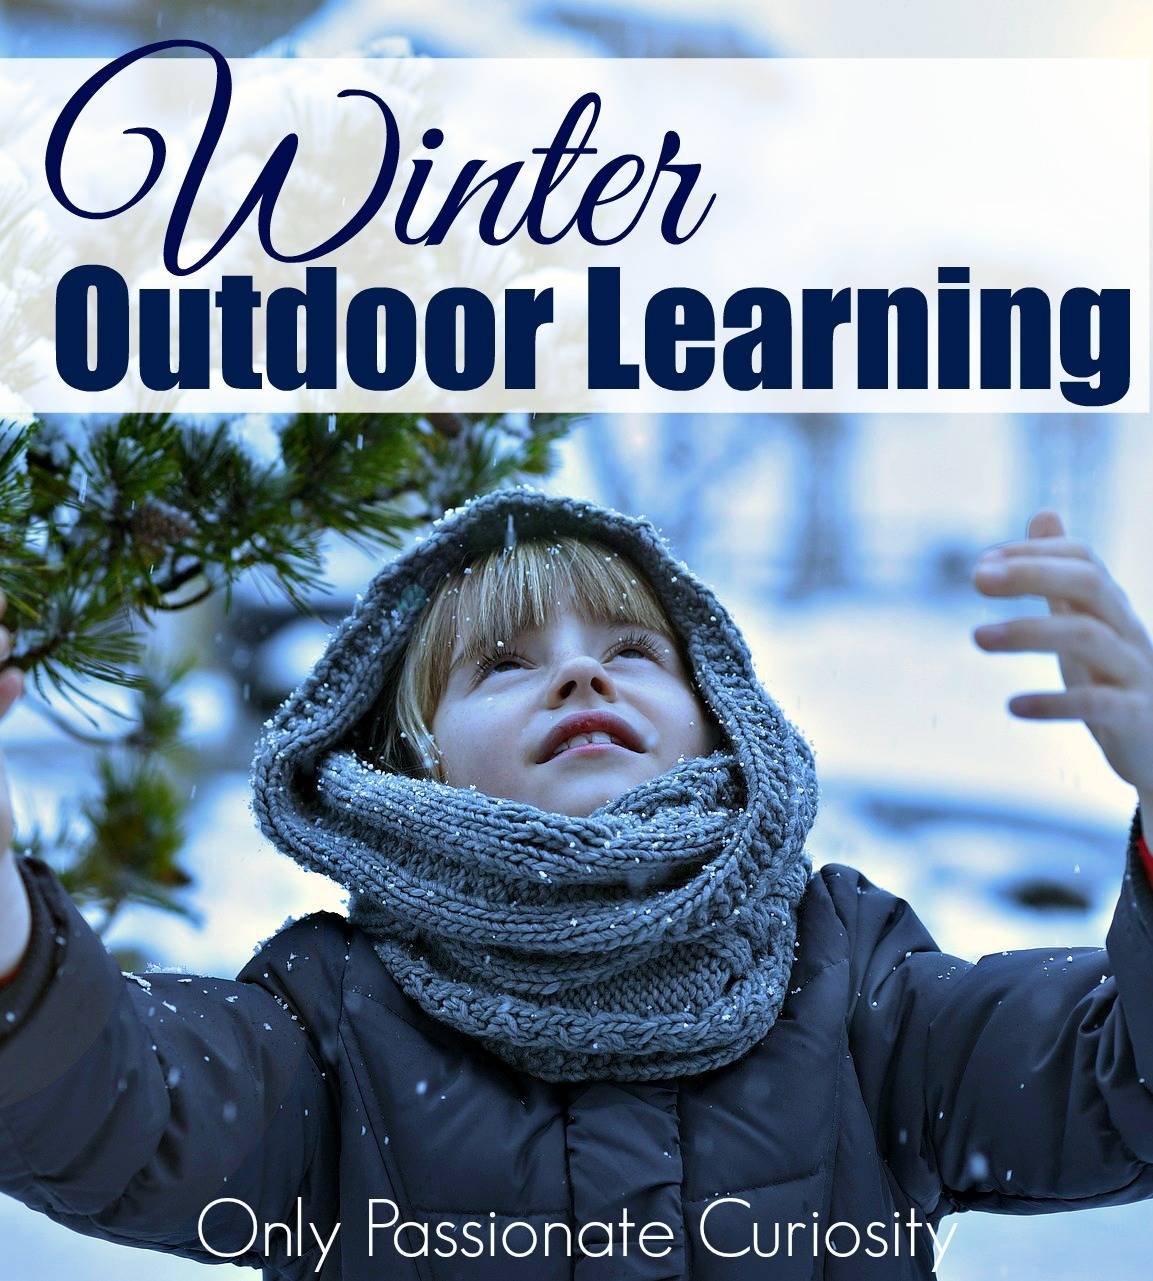 Who Says You Can’t Learn Outdoors in Winter?